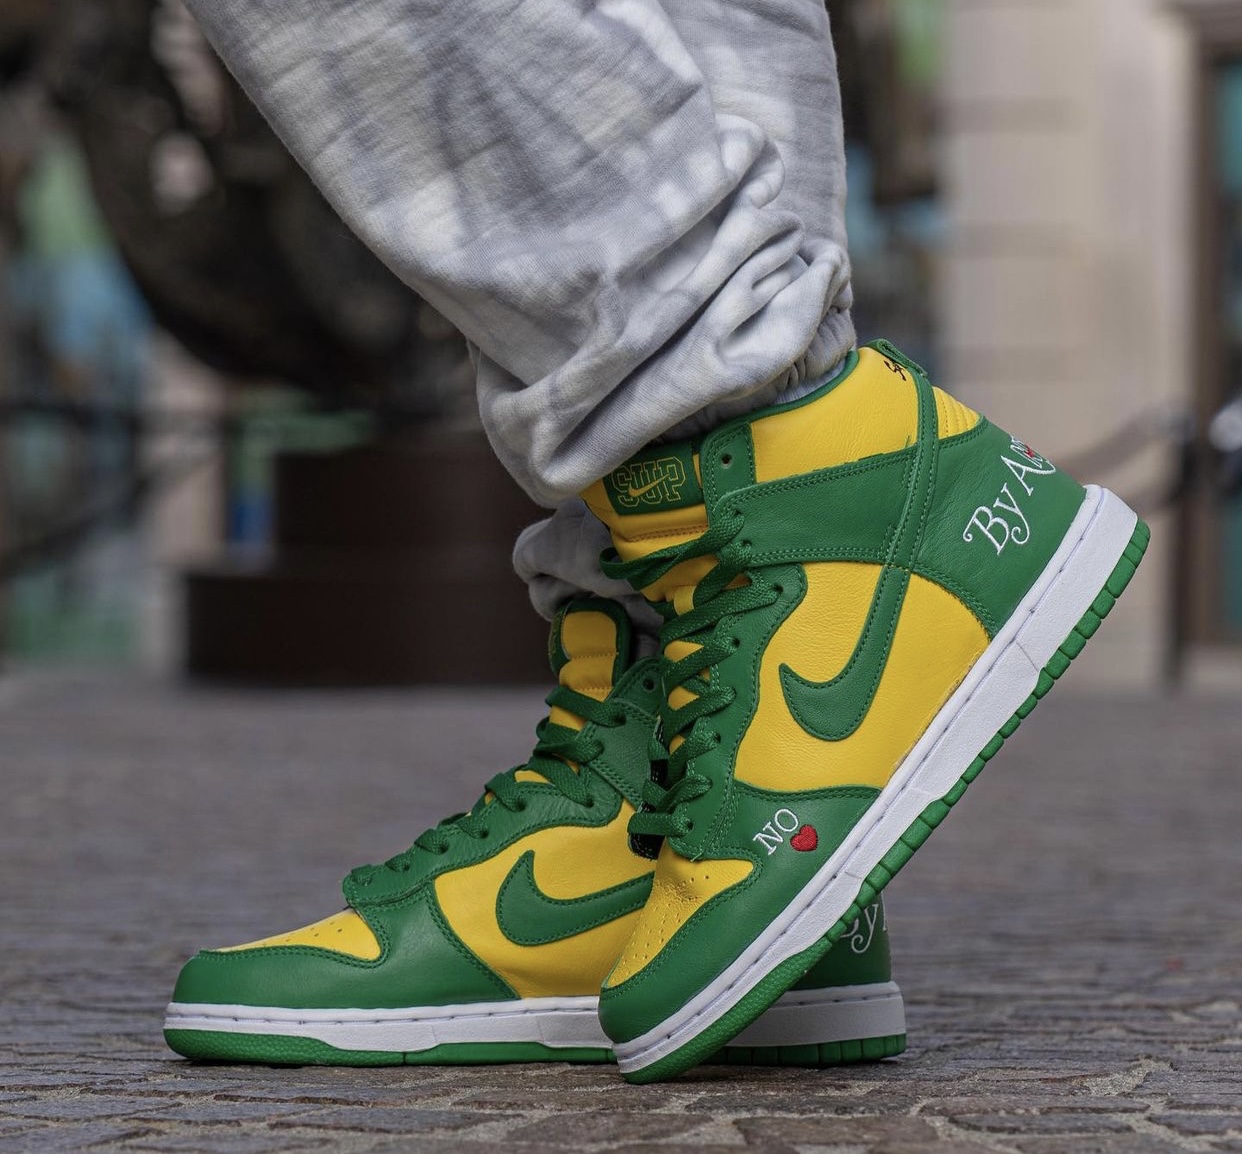 Supreme x Nike SB Dunk High By Any Means Photos